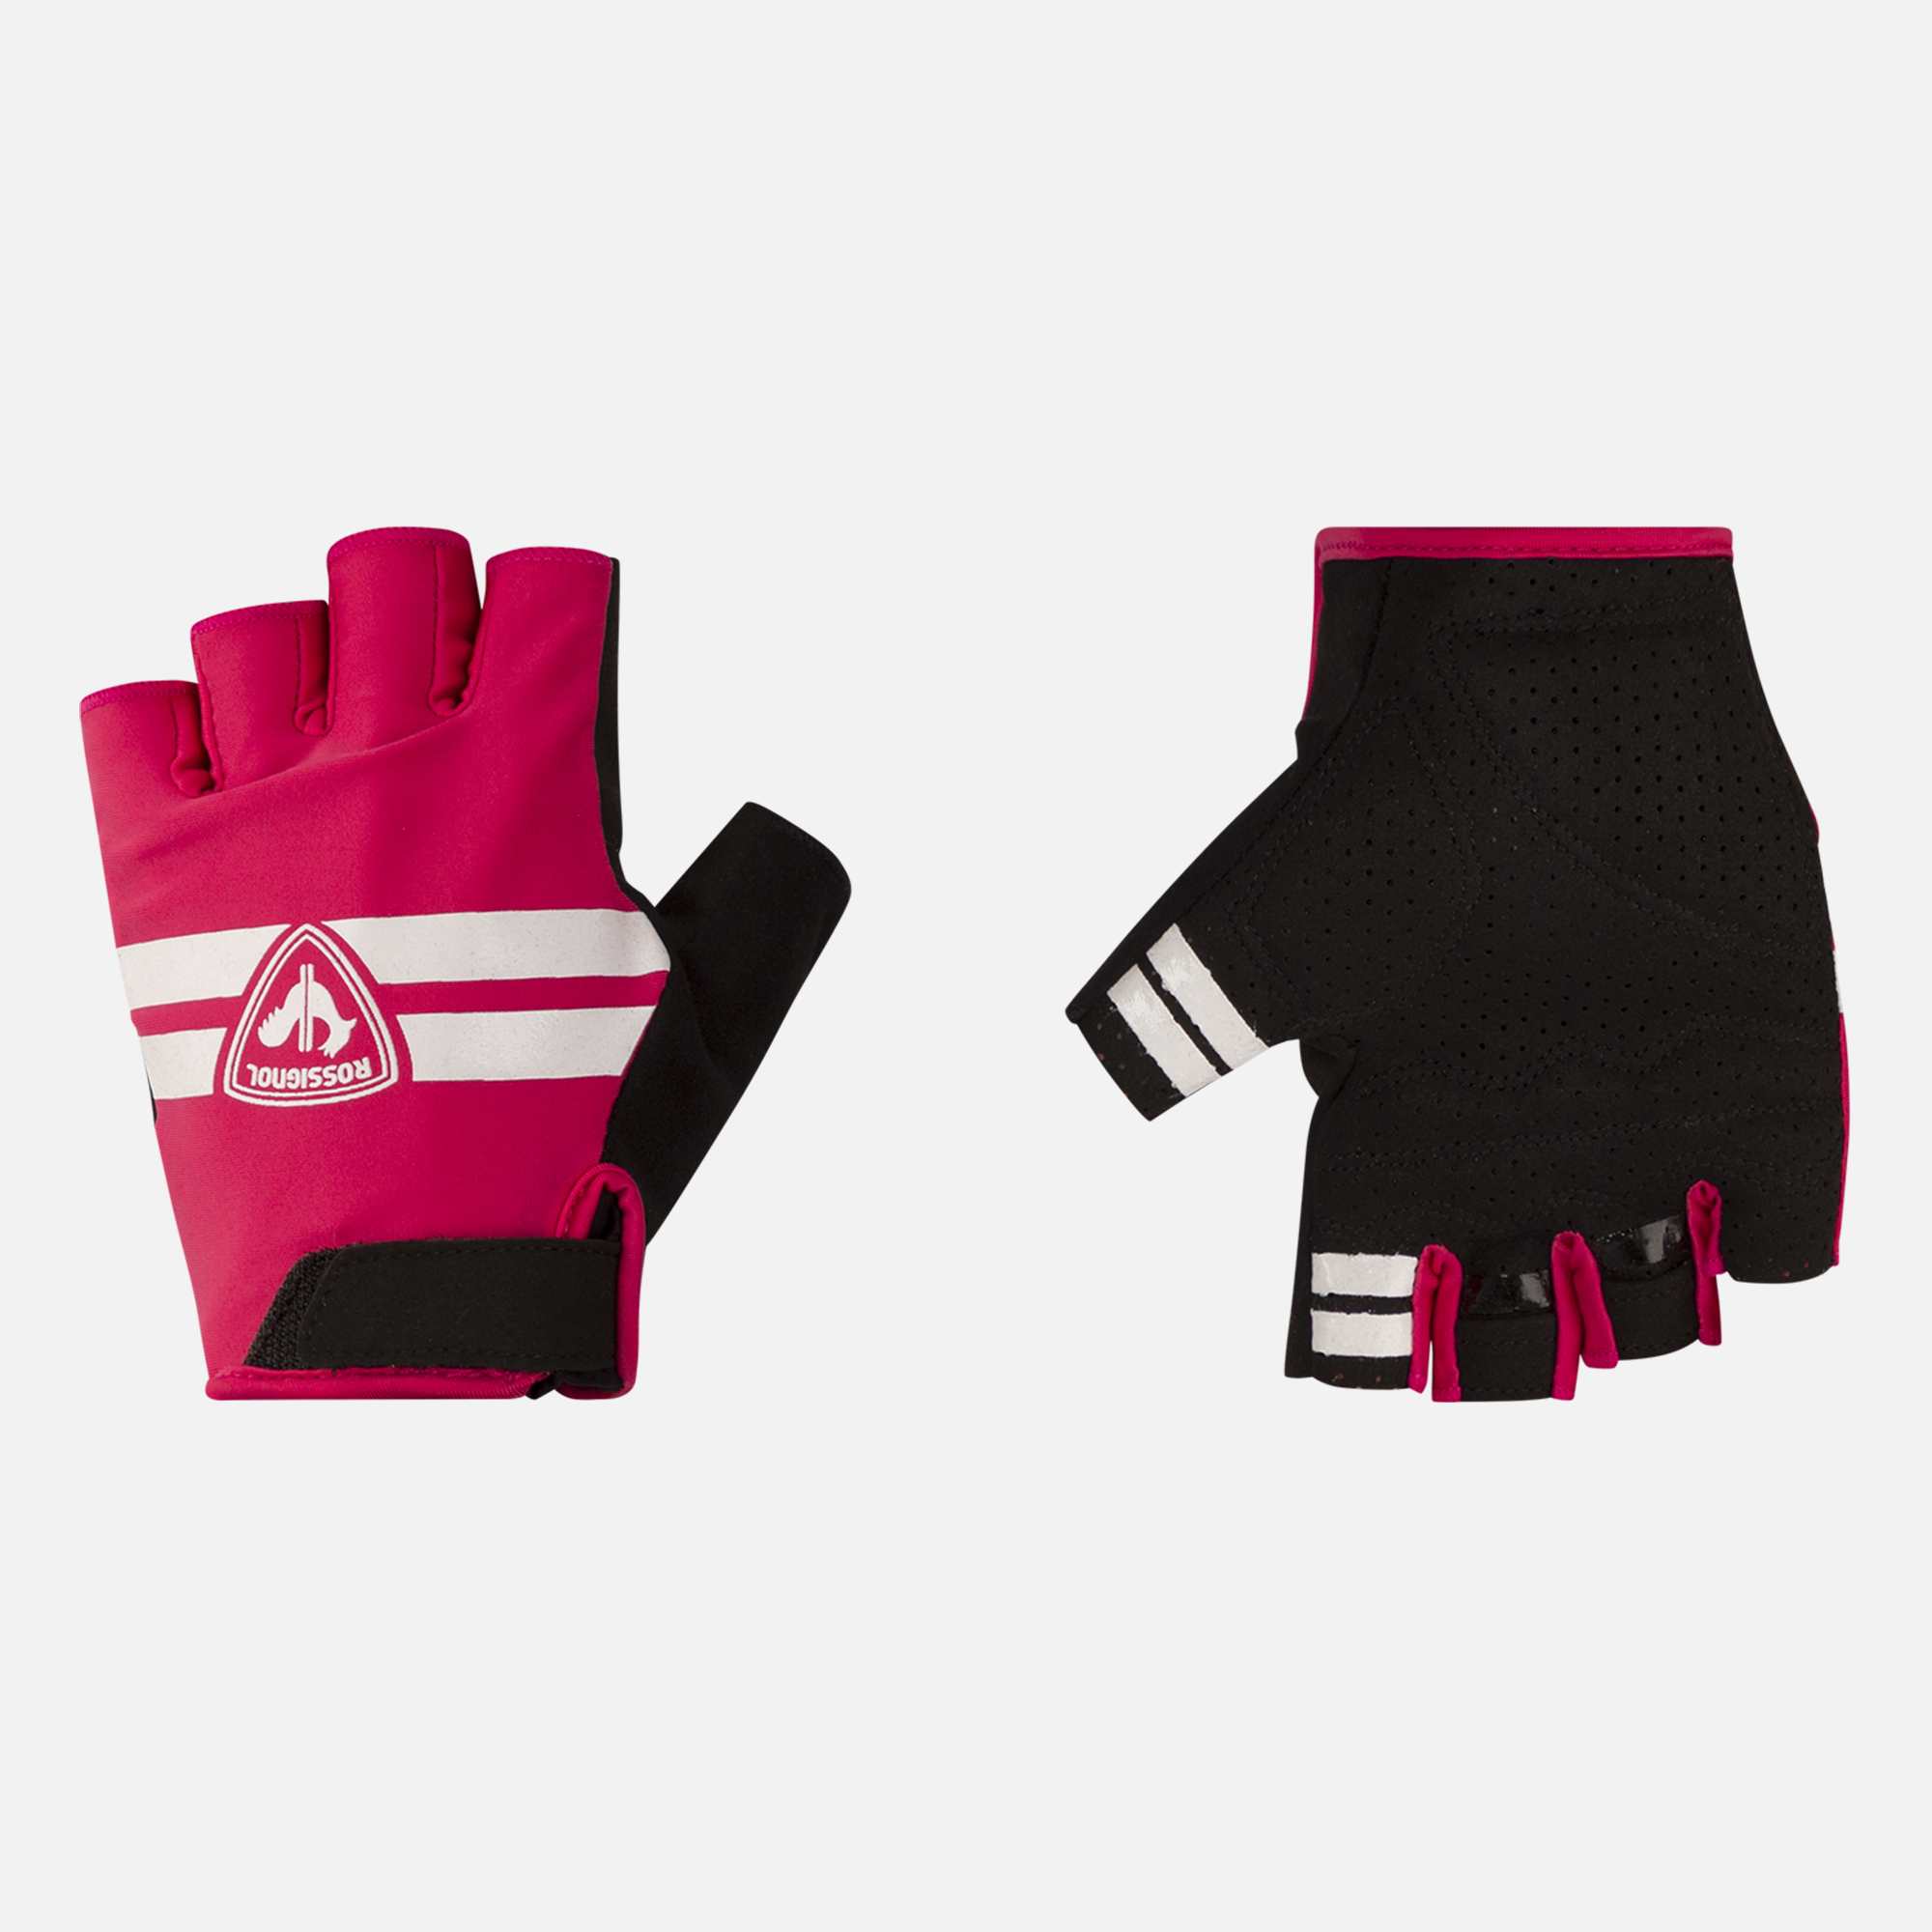 Women's stretch cycling gloves